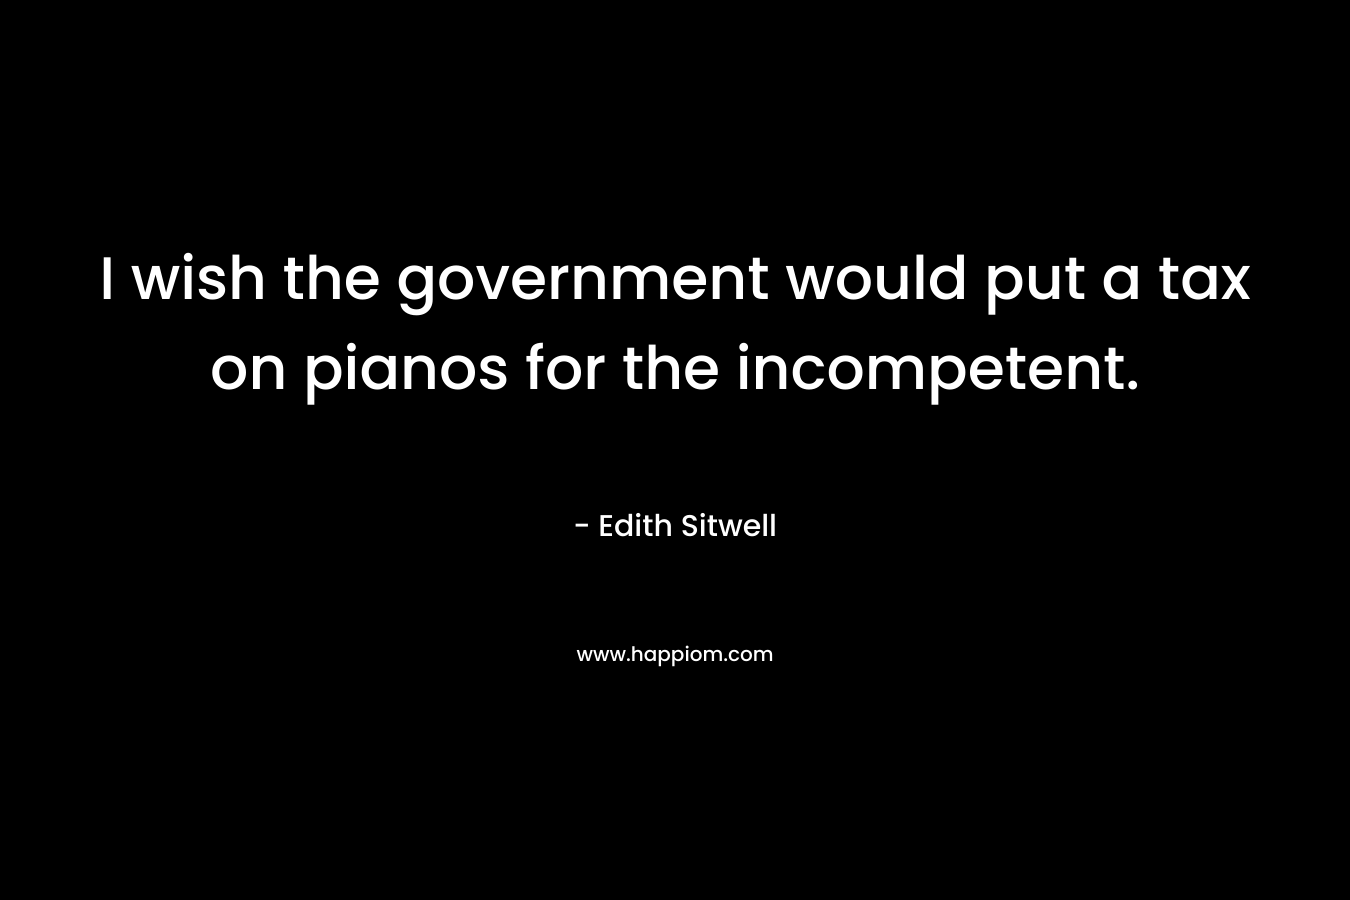 I wish the government would put a tax on pianos for the incompetent. – Edith Sitwell